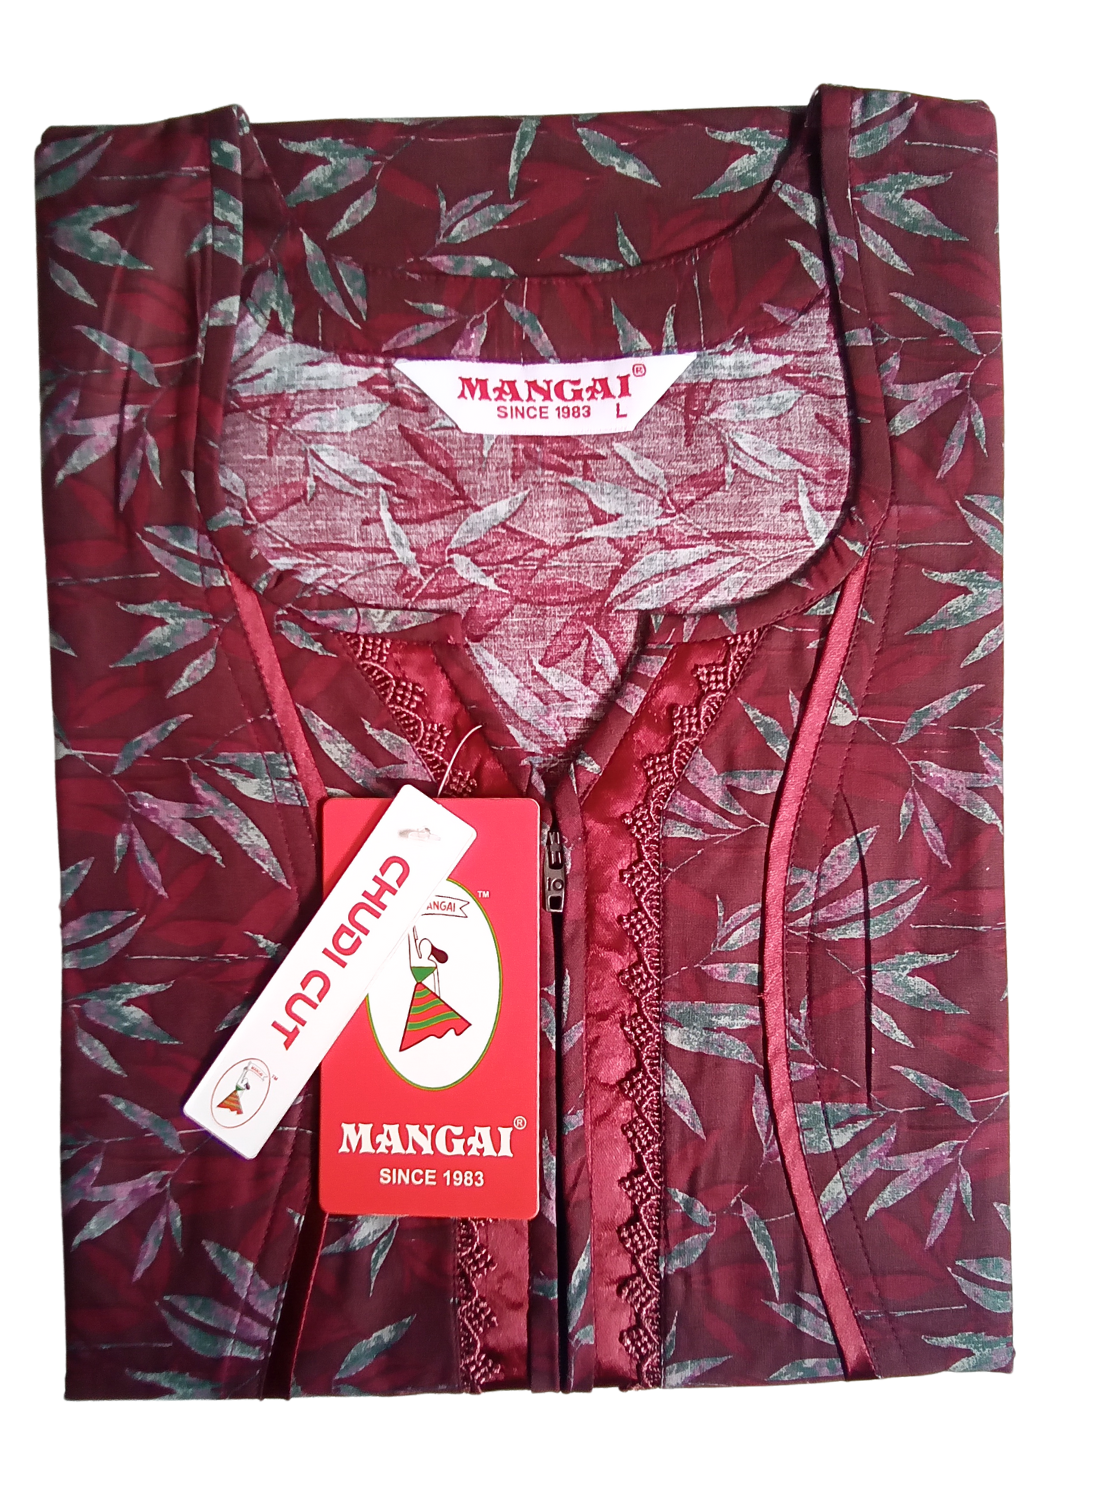 MANGAI New Arrivals Cotton CHUDI CUT Model Nighties - Fancy Neck | With Side Pocket |Shrinkage Free Nighties | Stylish Collection's for Trendy Women's